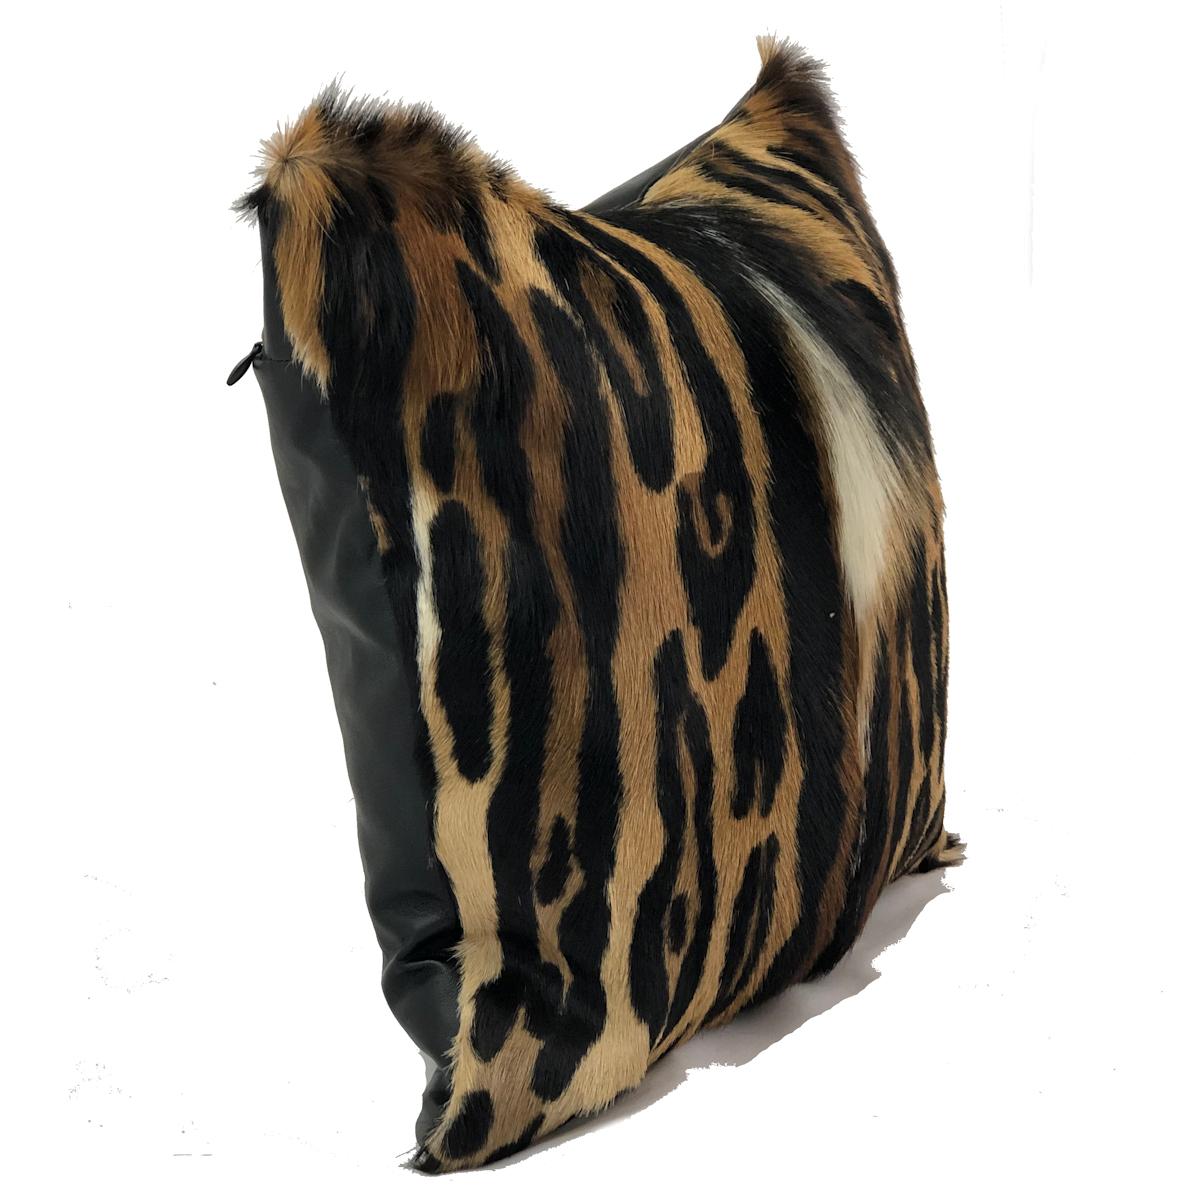 It's the season of wild and exotic leopard prints, so set your interiors free with this glamorous leopard fur pillow. A beautiful designed print, screen printed over an African Springbok skin capturing the natural undertones found in each individual